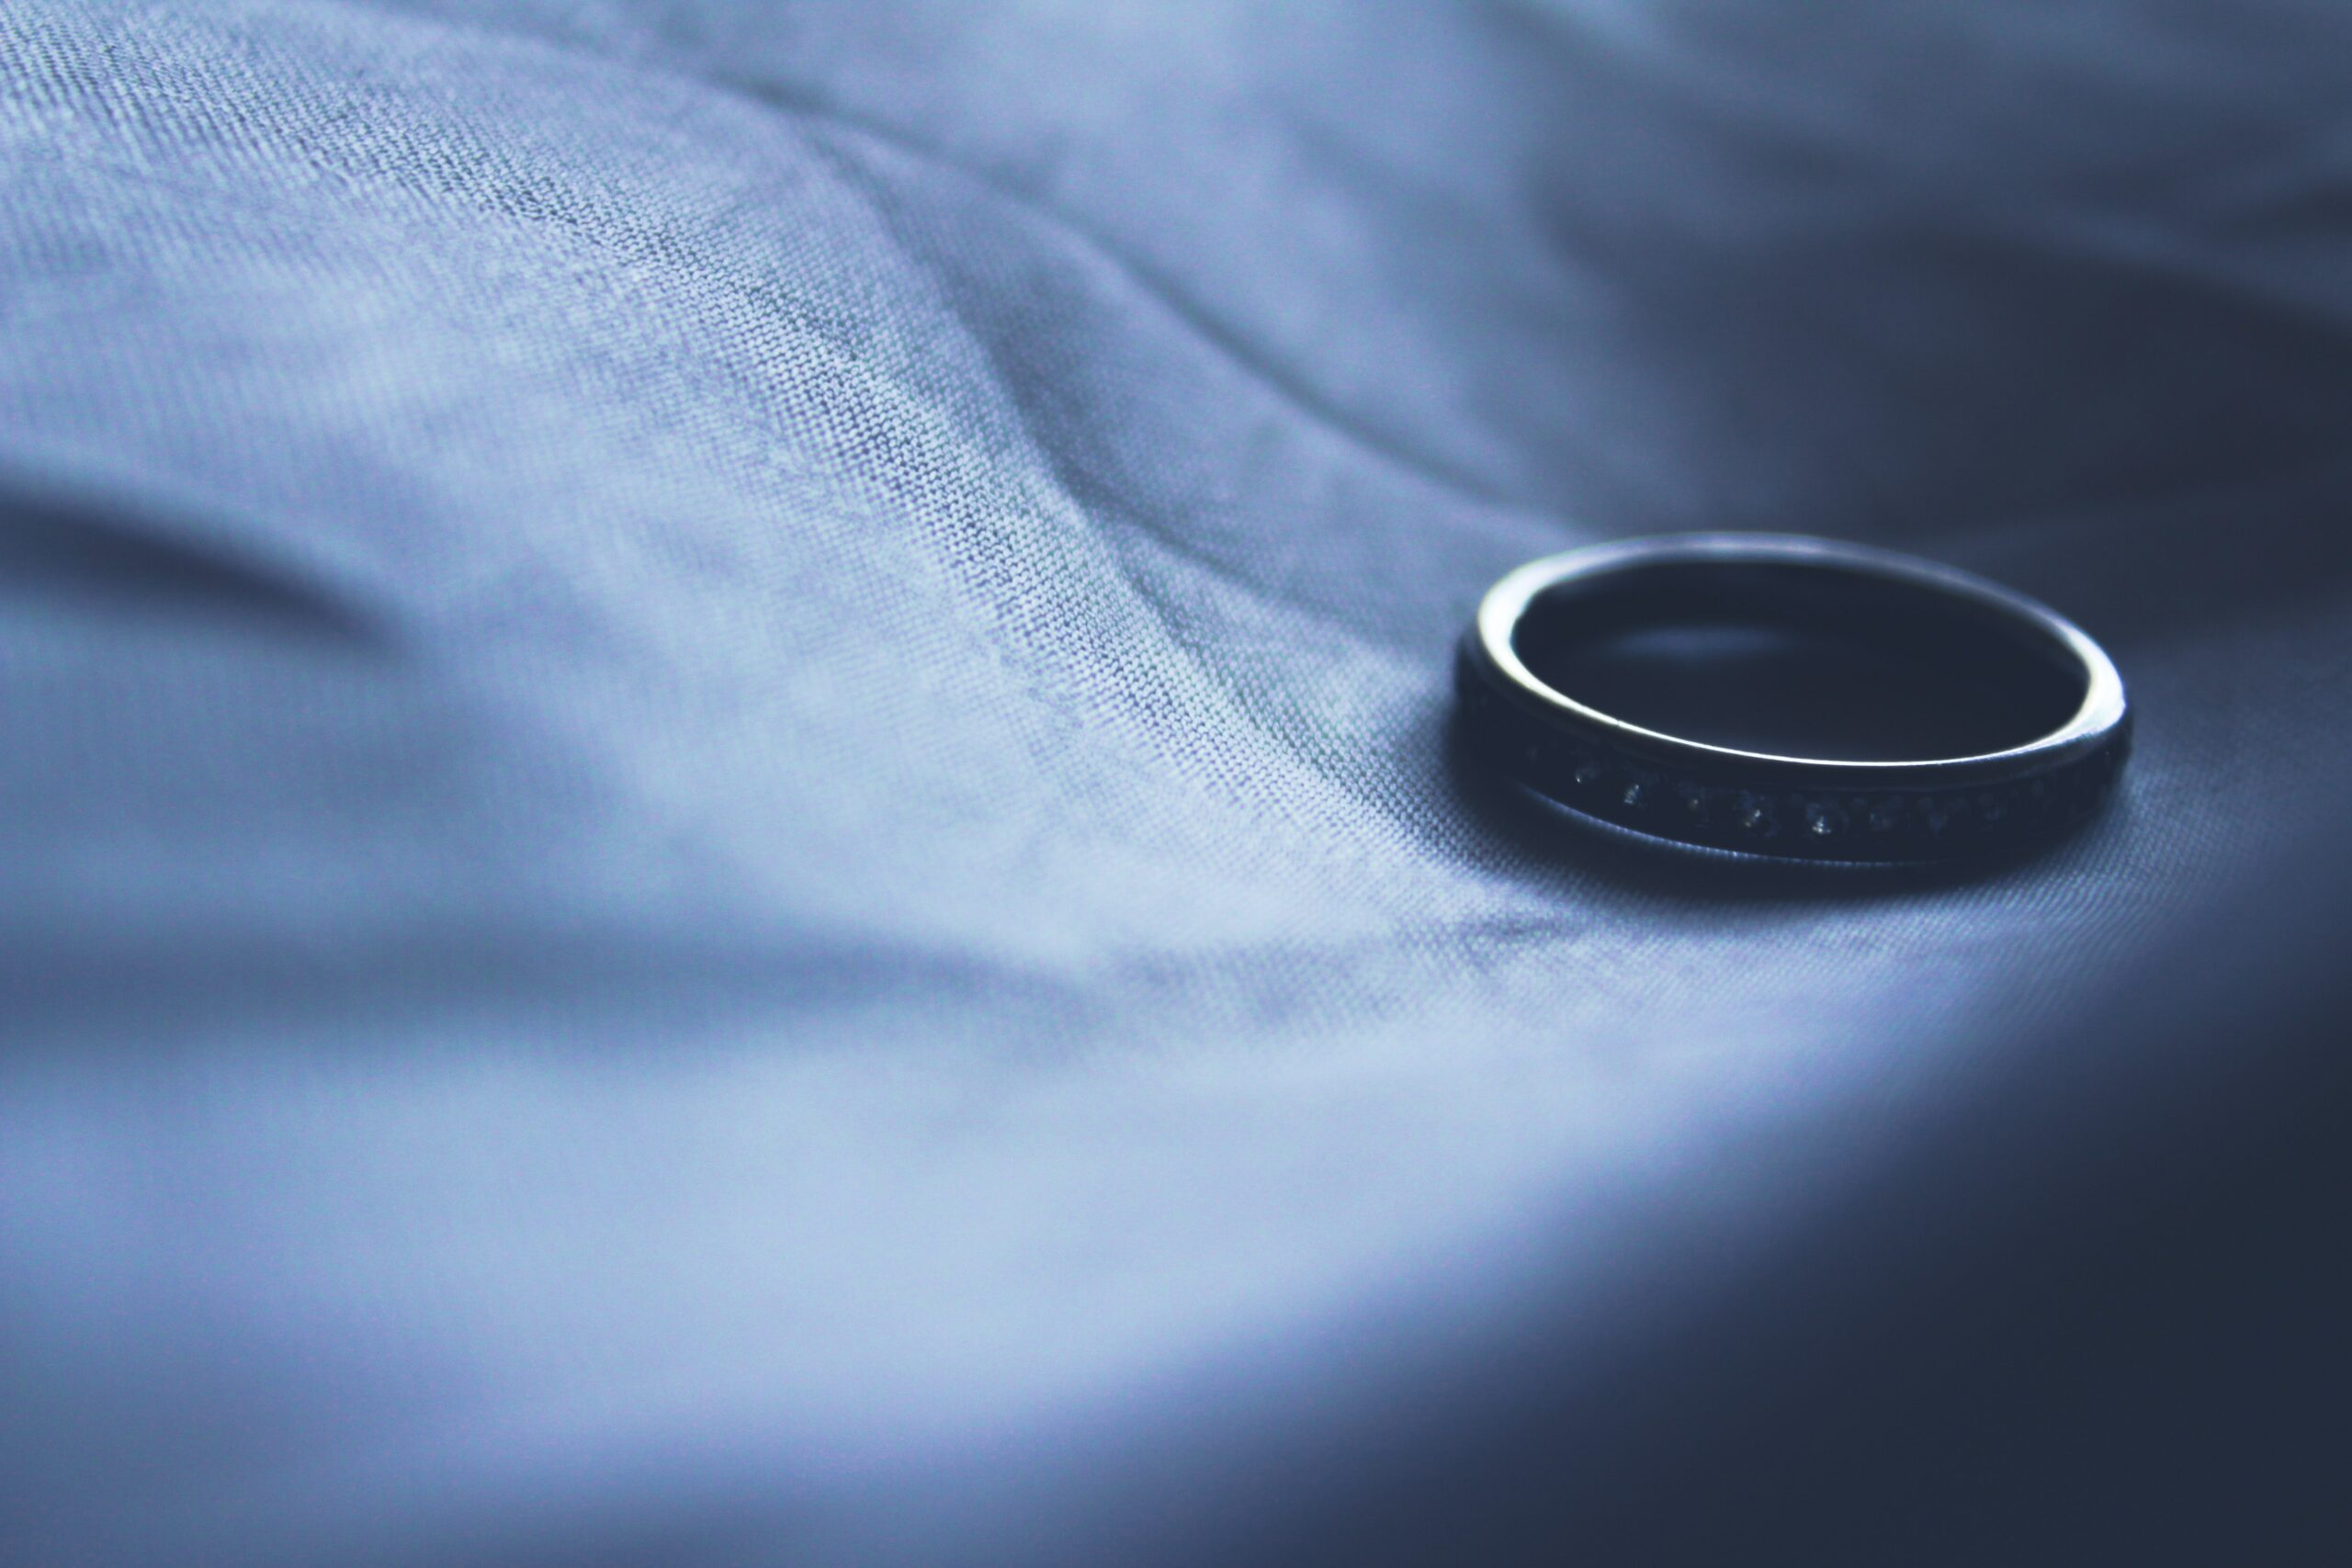 A wedding ring - dispelling common myths around divorce and finances